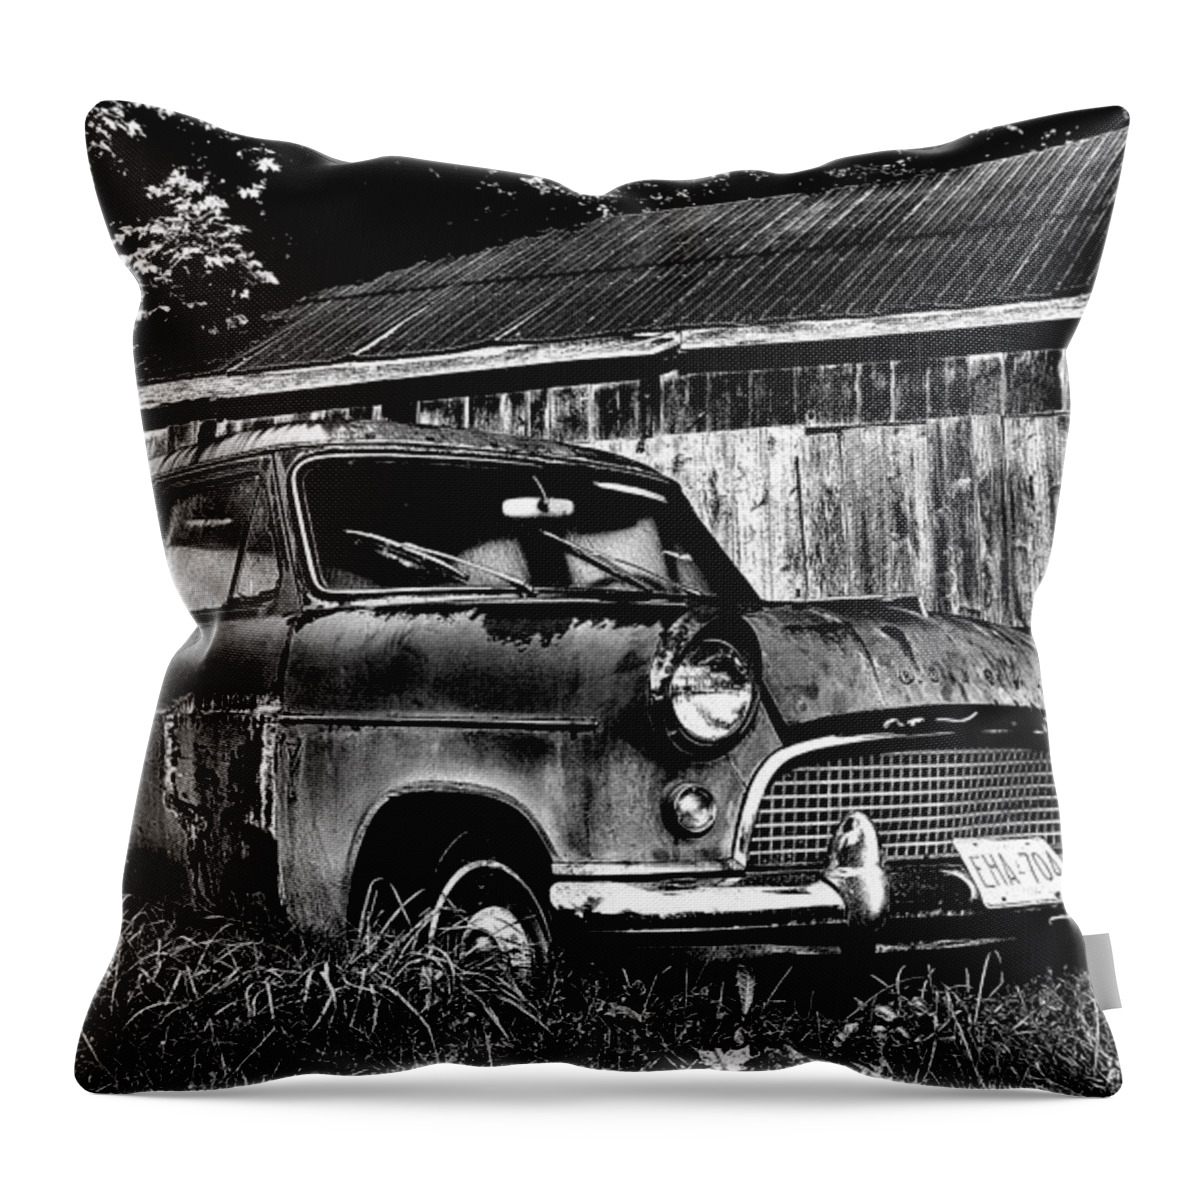 Black And White Throw Pillow featuring the photograph Old Dreams by Jeremy Hall